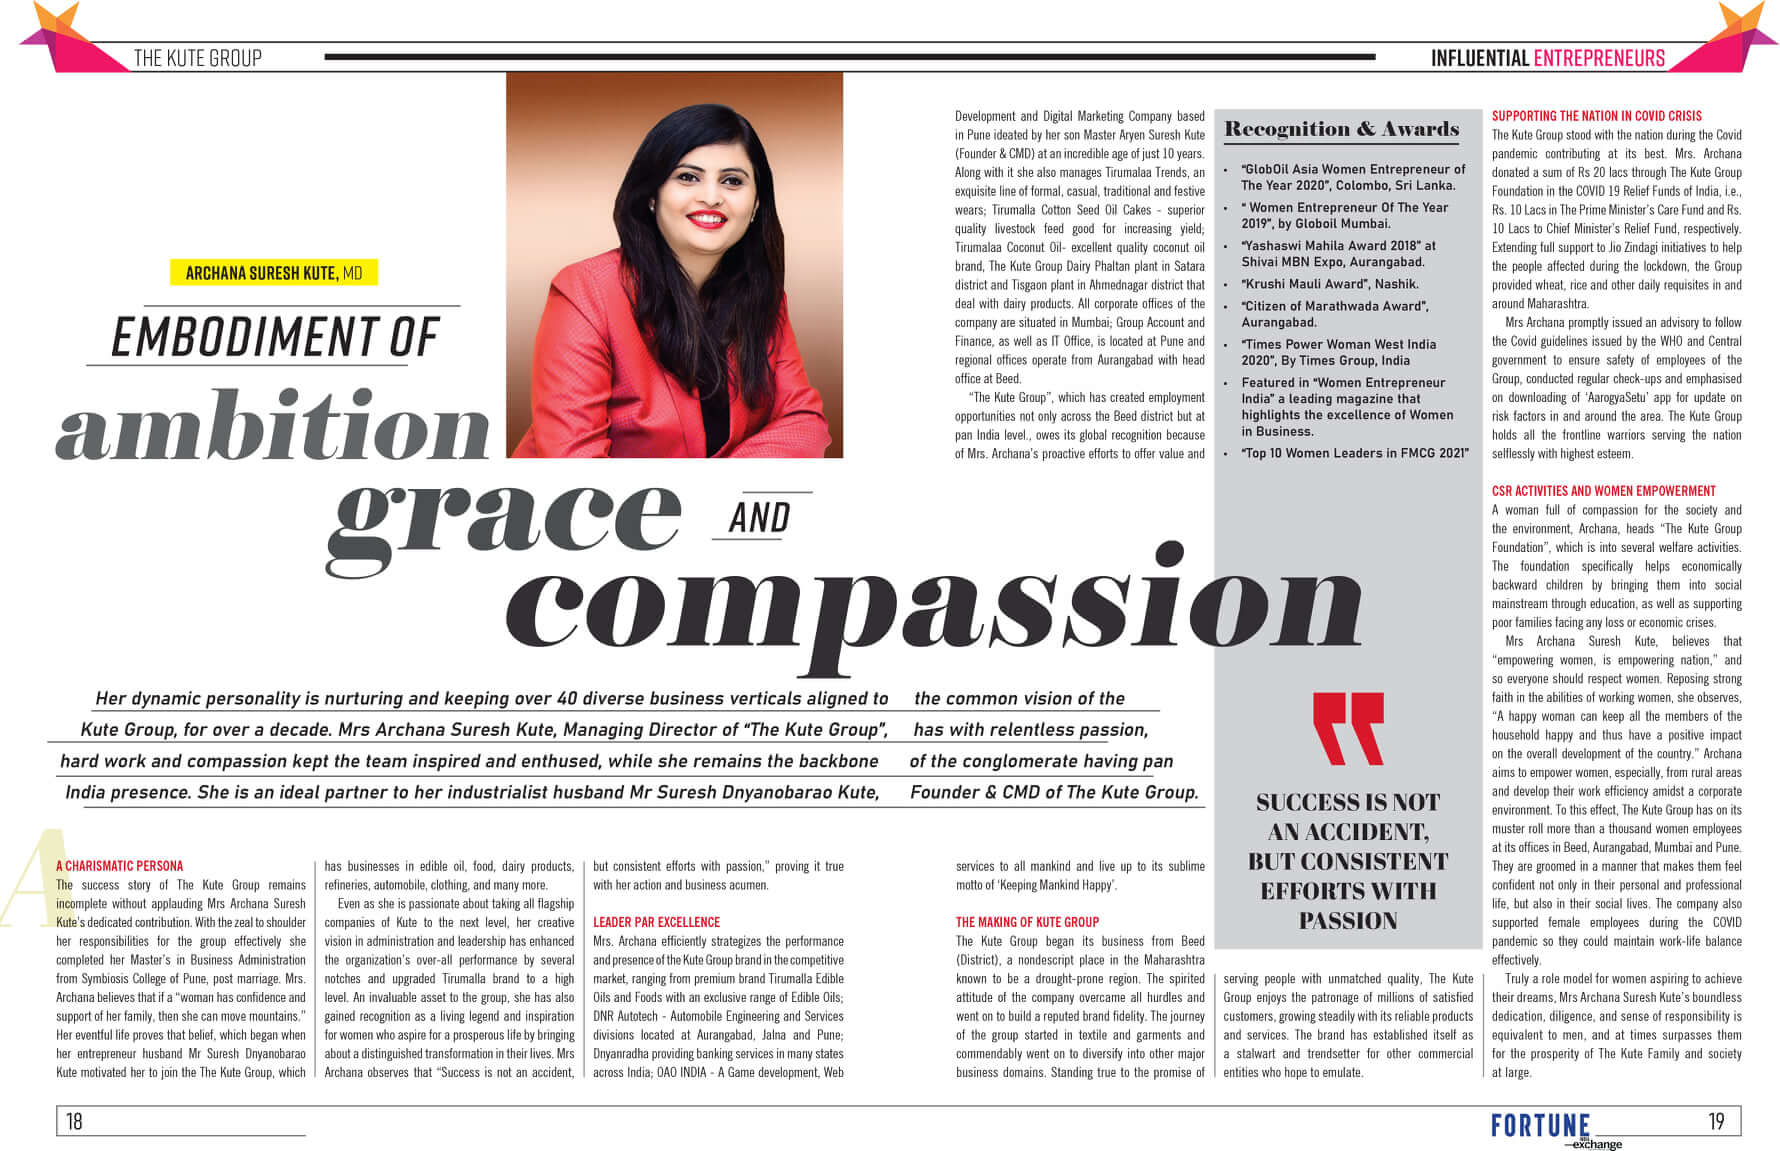 Mrs. Archana Kute featured in Fortune India Exchange Business Magazine